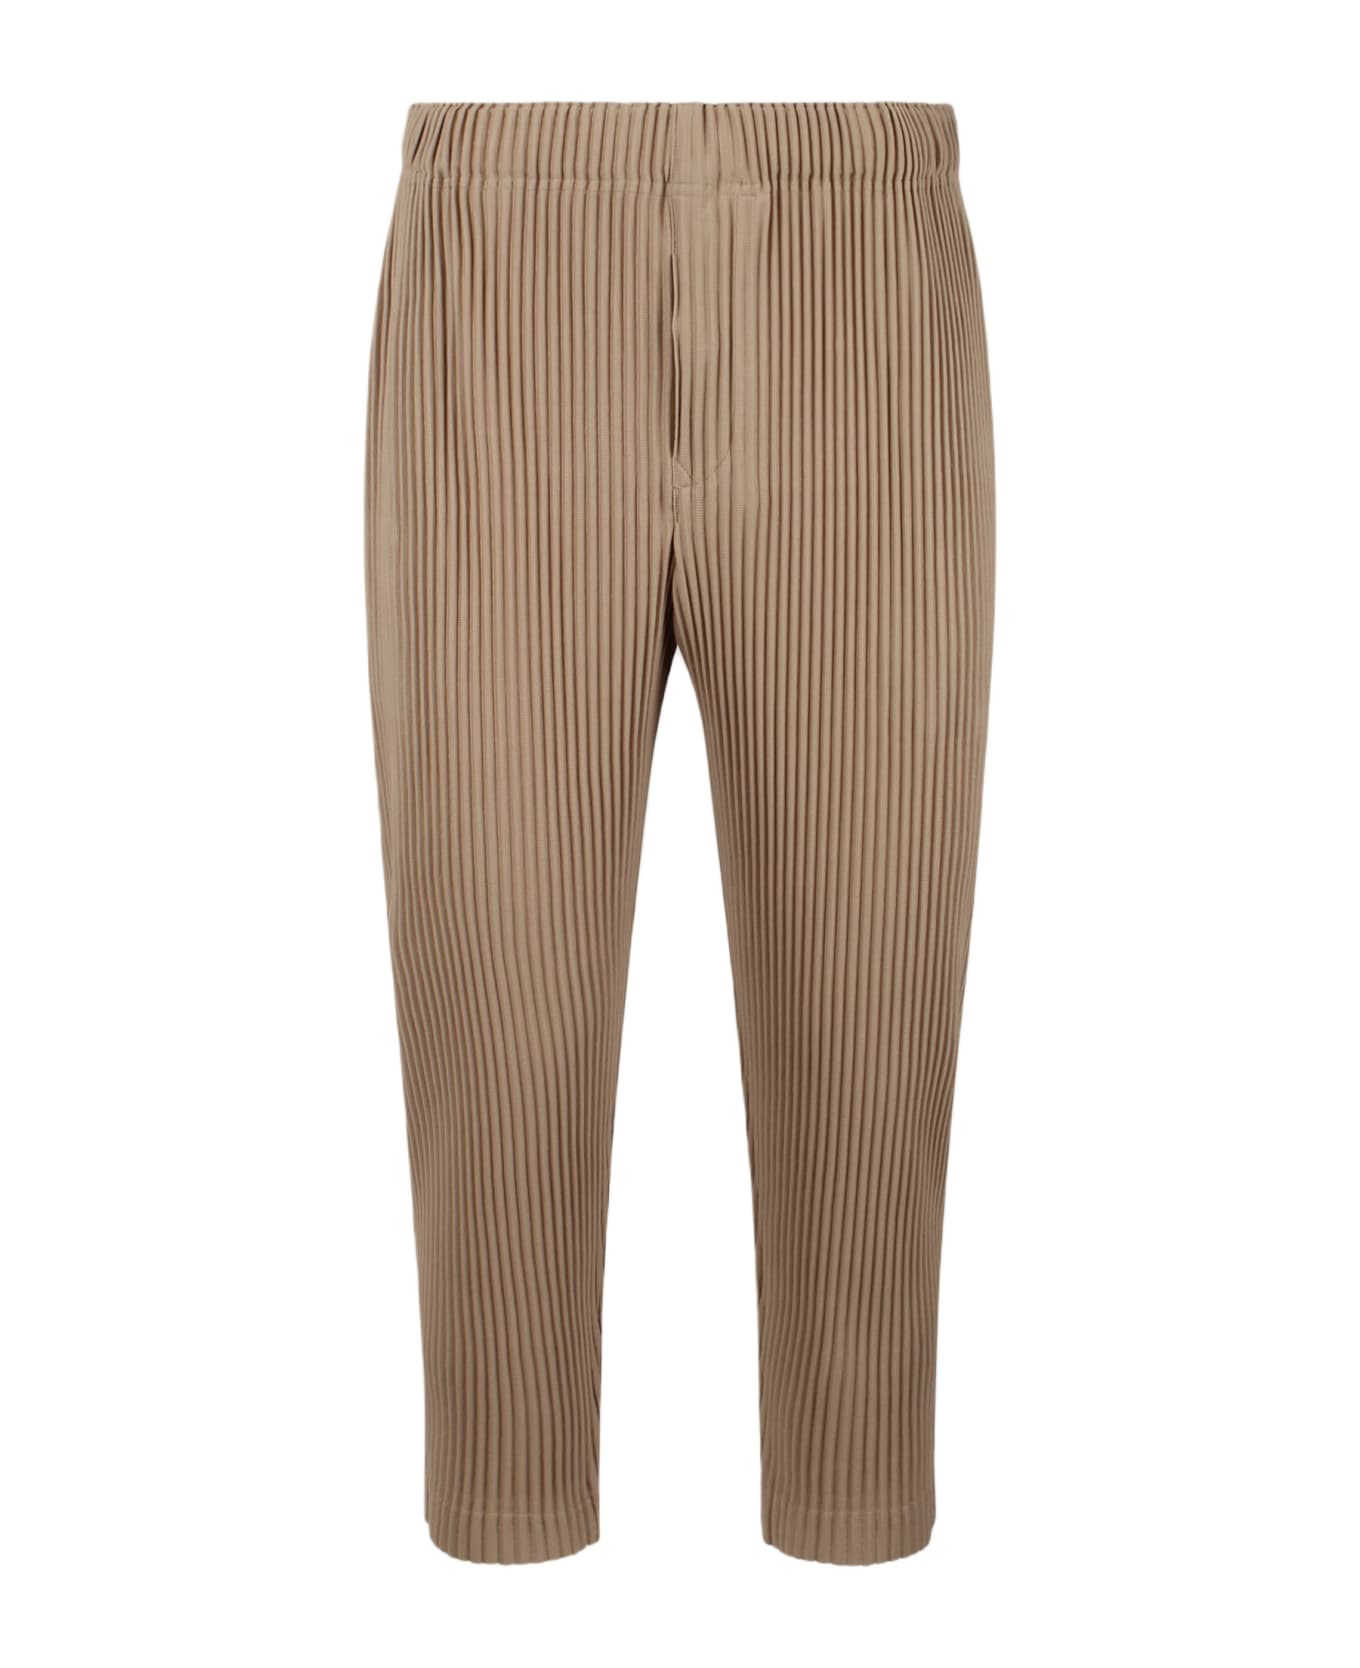 Homme Plissé Issey Miyake Mc February Trousers - Beige ボトムス